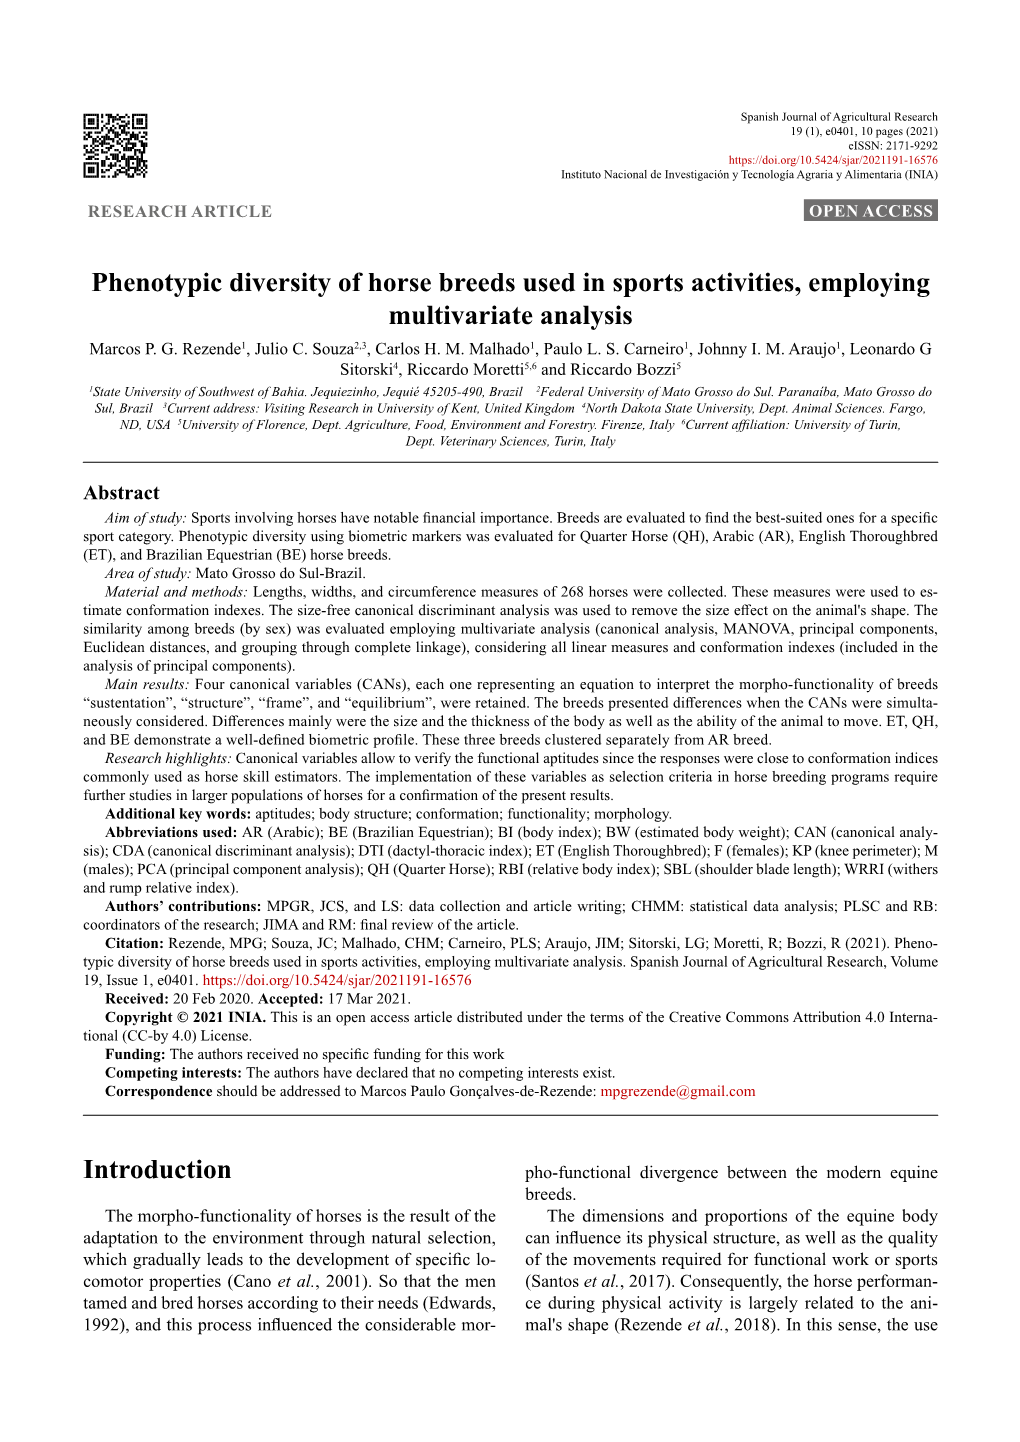 Phenotypic Diversity of Horse Breeds Used in Sports Activities, Employing Multivariate Analysis Marcos P